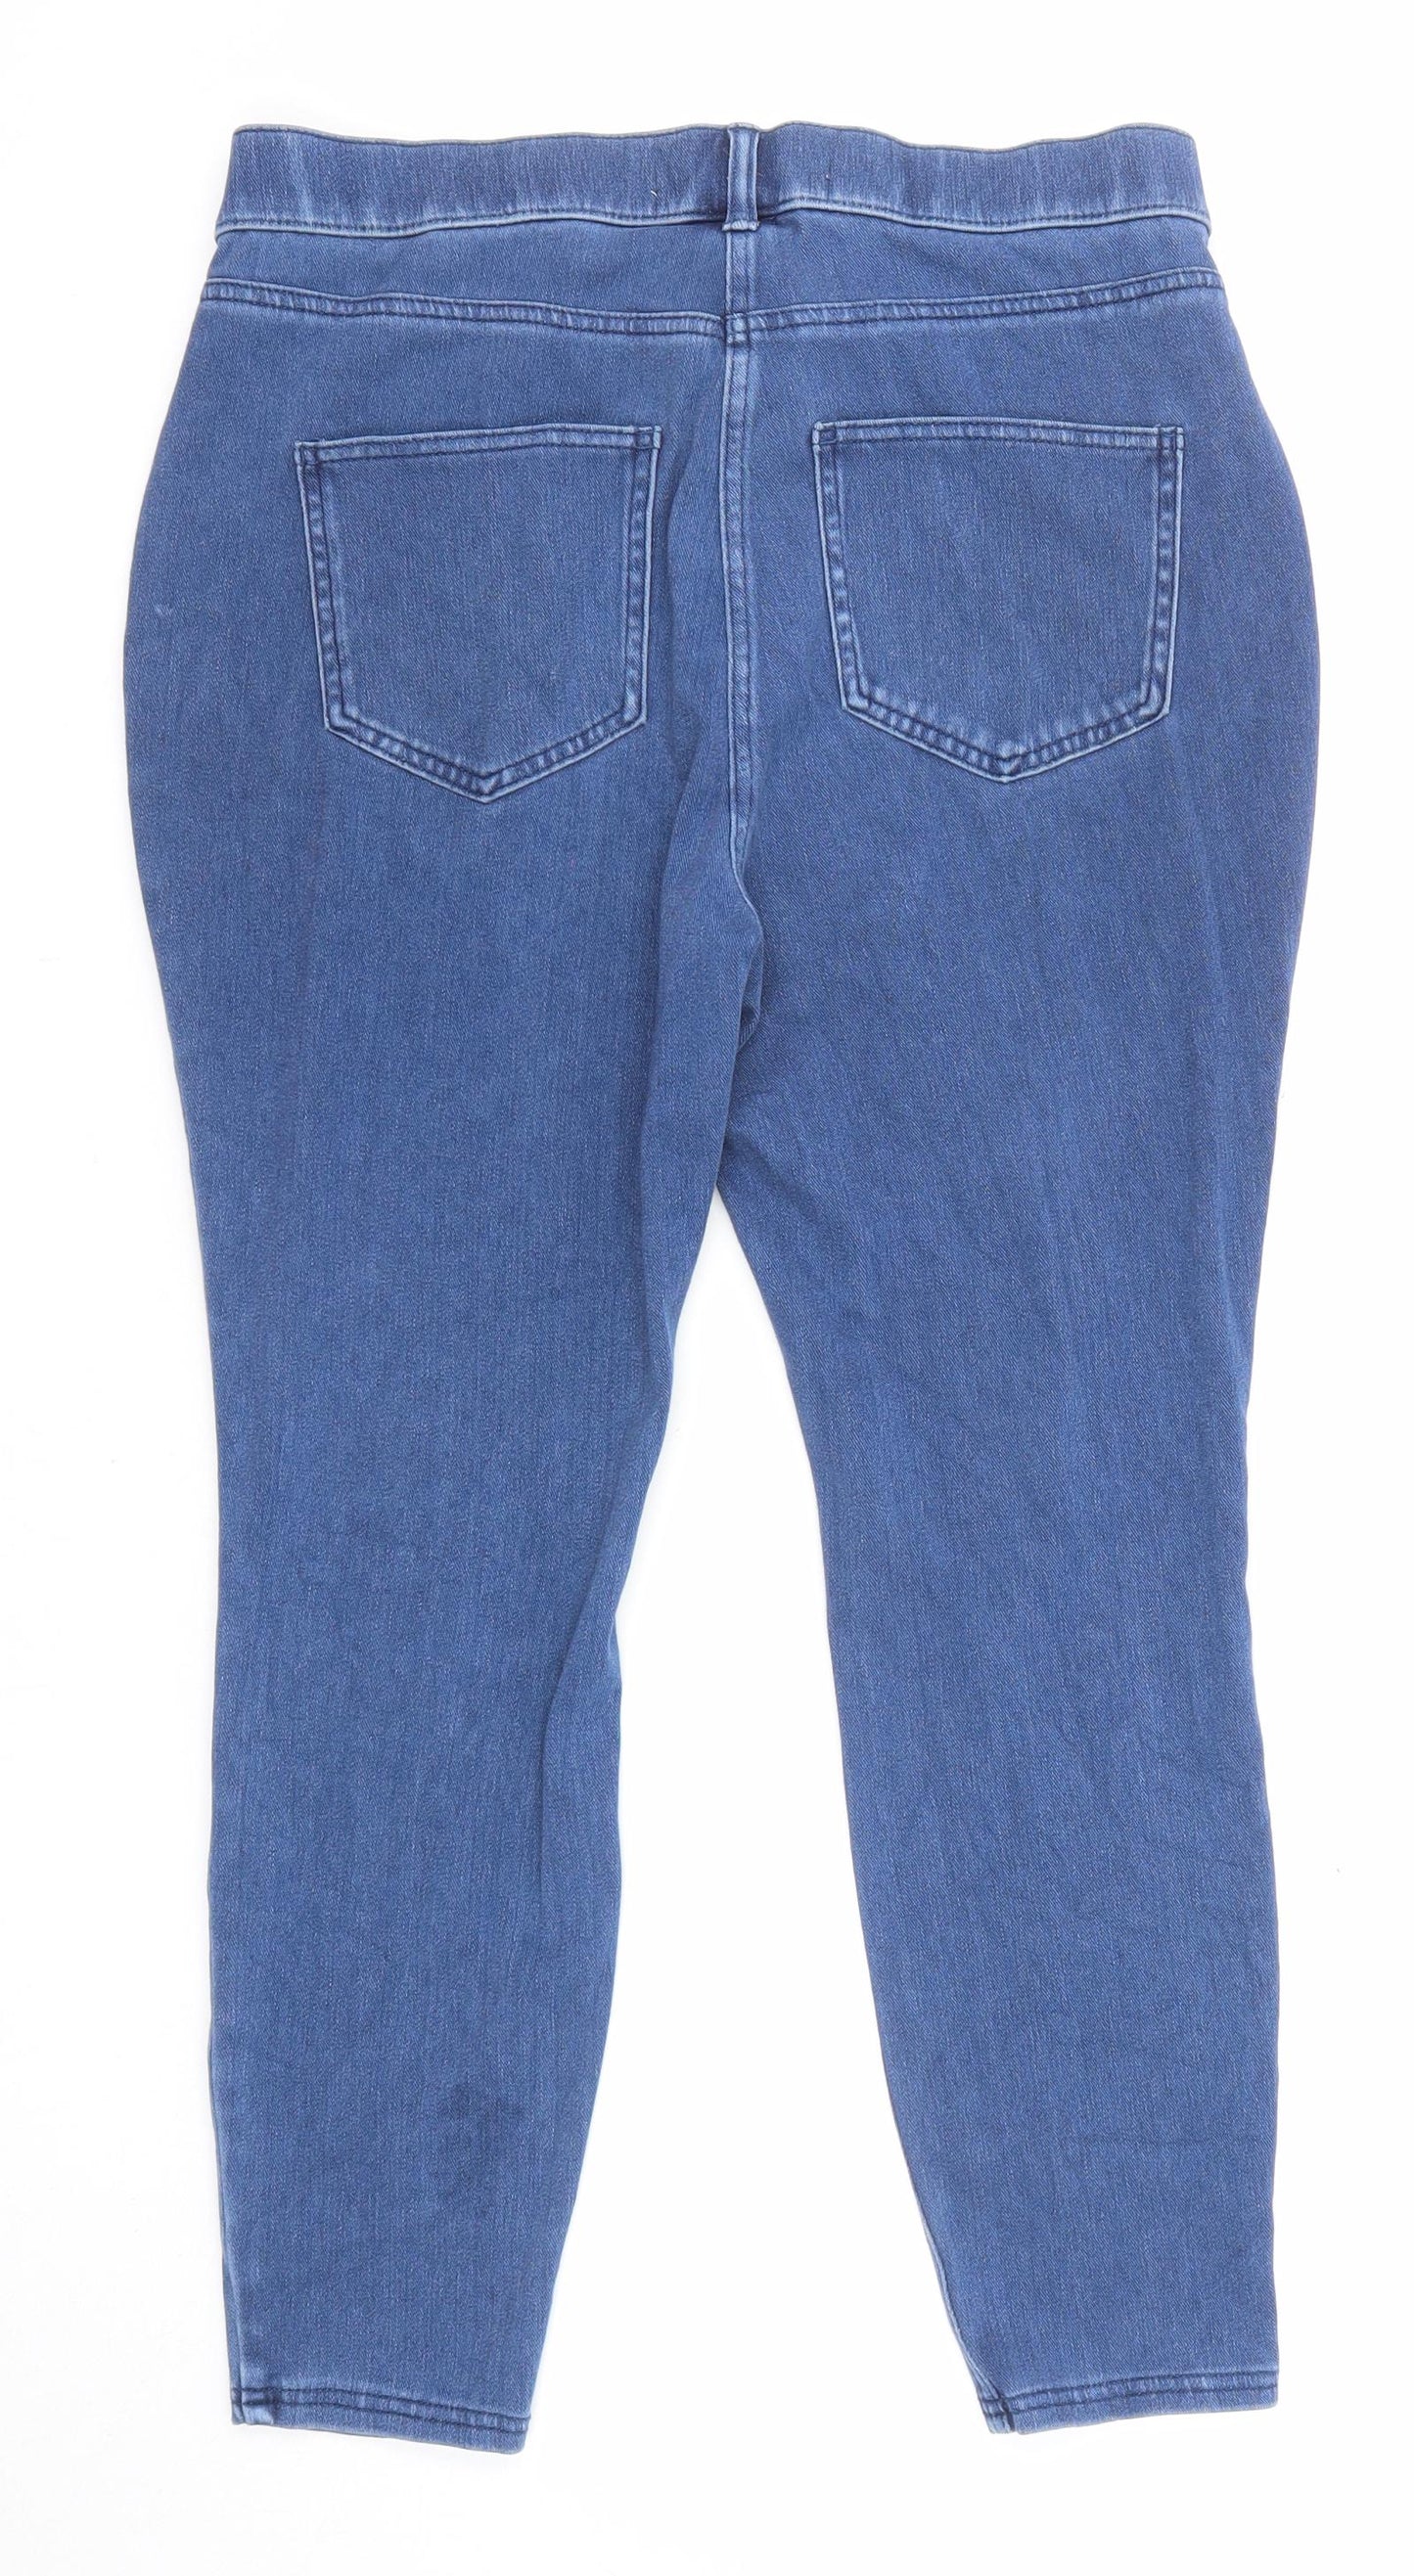 NEXT Womens Blue Cotton Jegging Jeans Size 14 L23 in Regular Zip